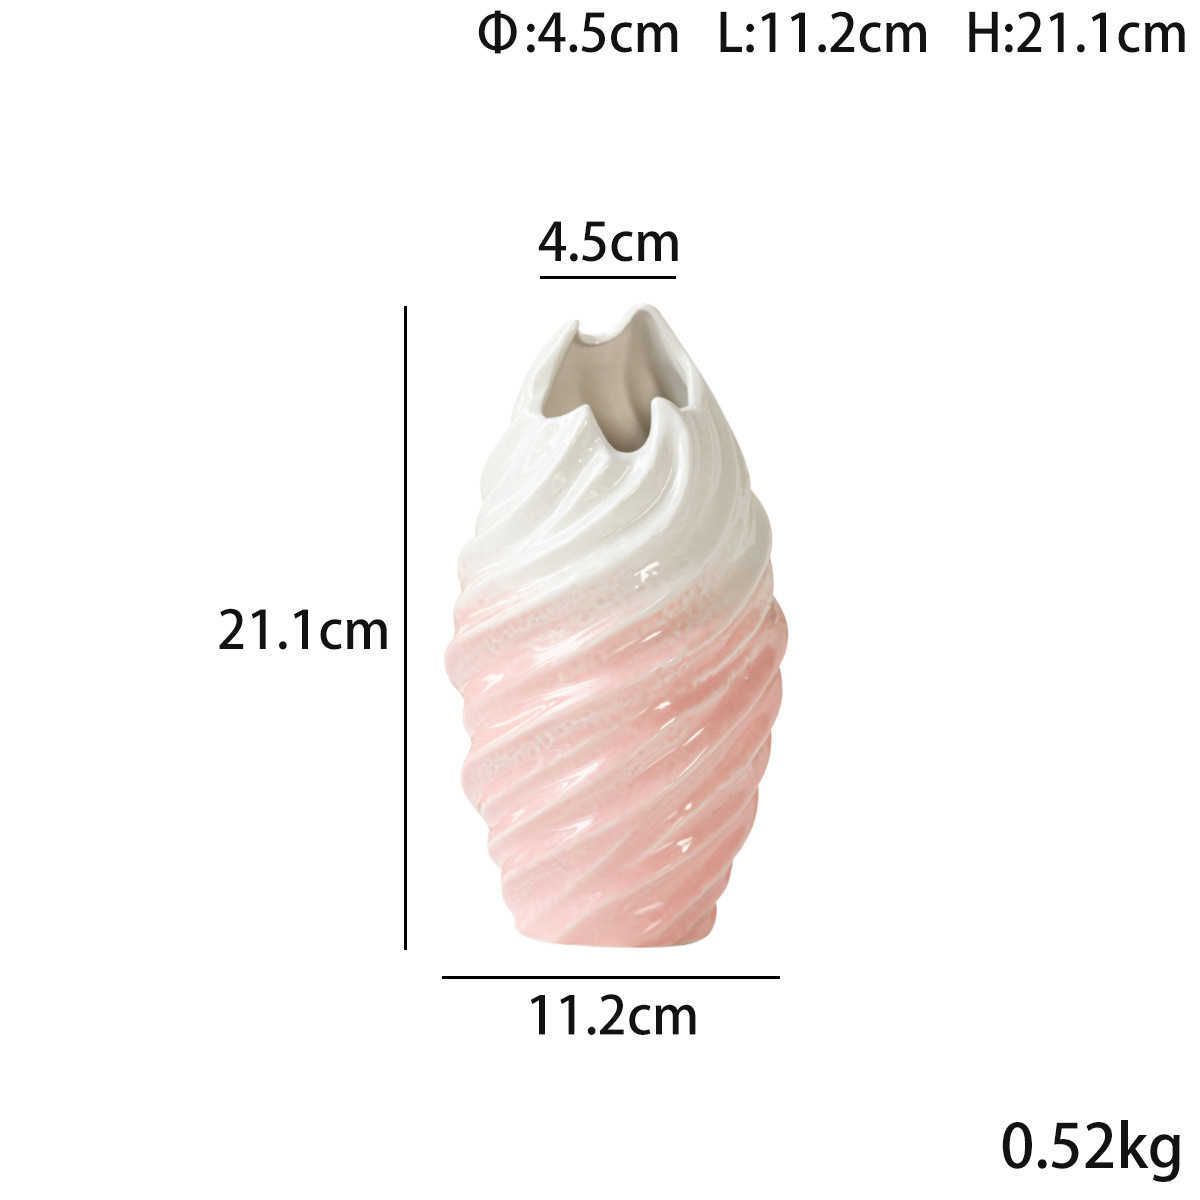 Height 21.1cm-a